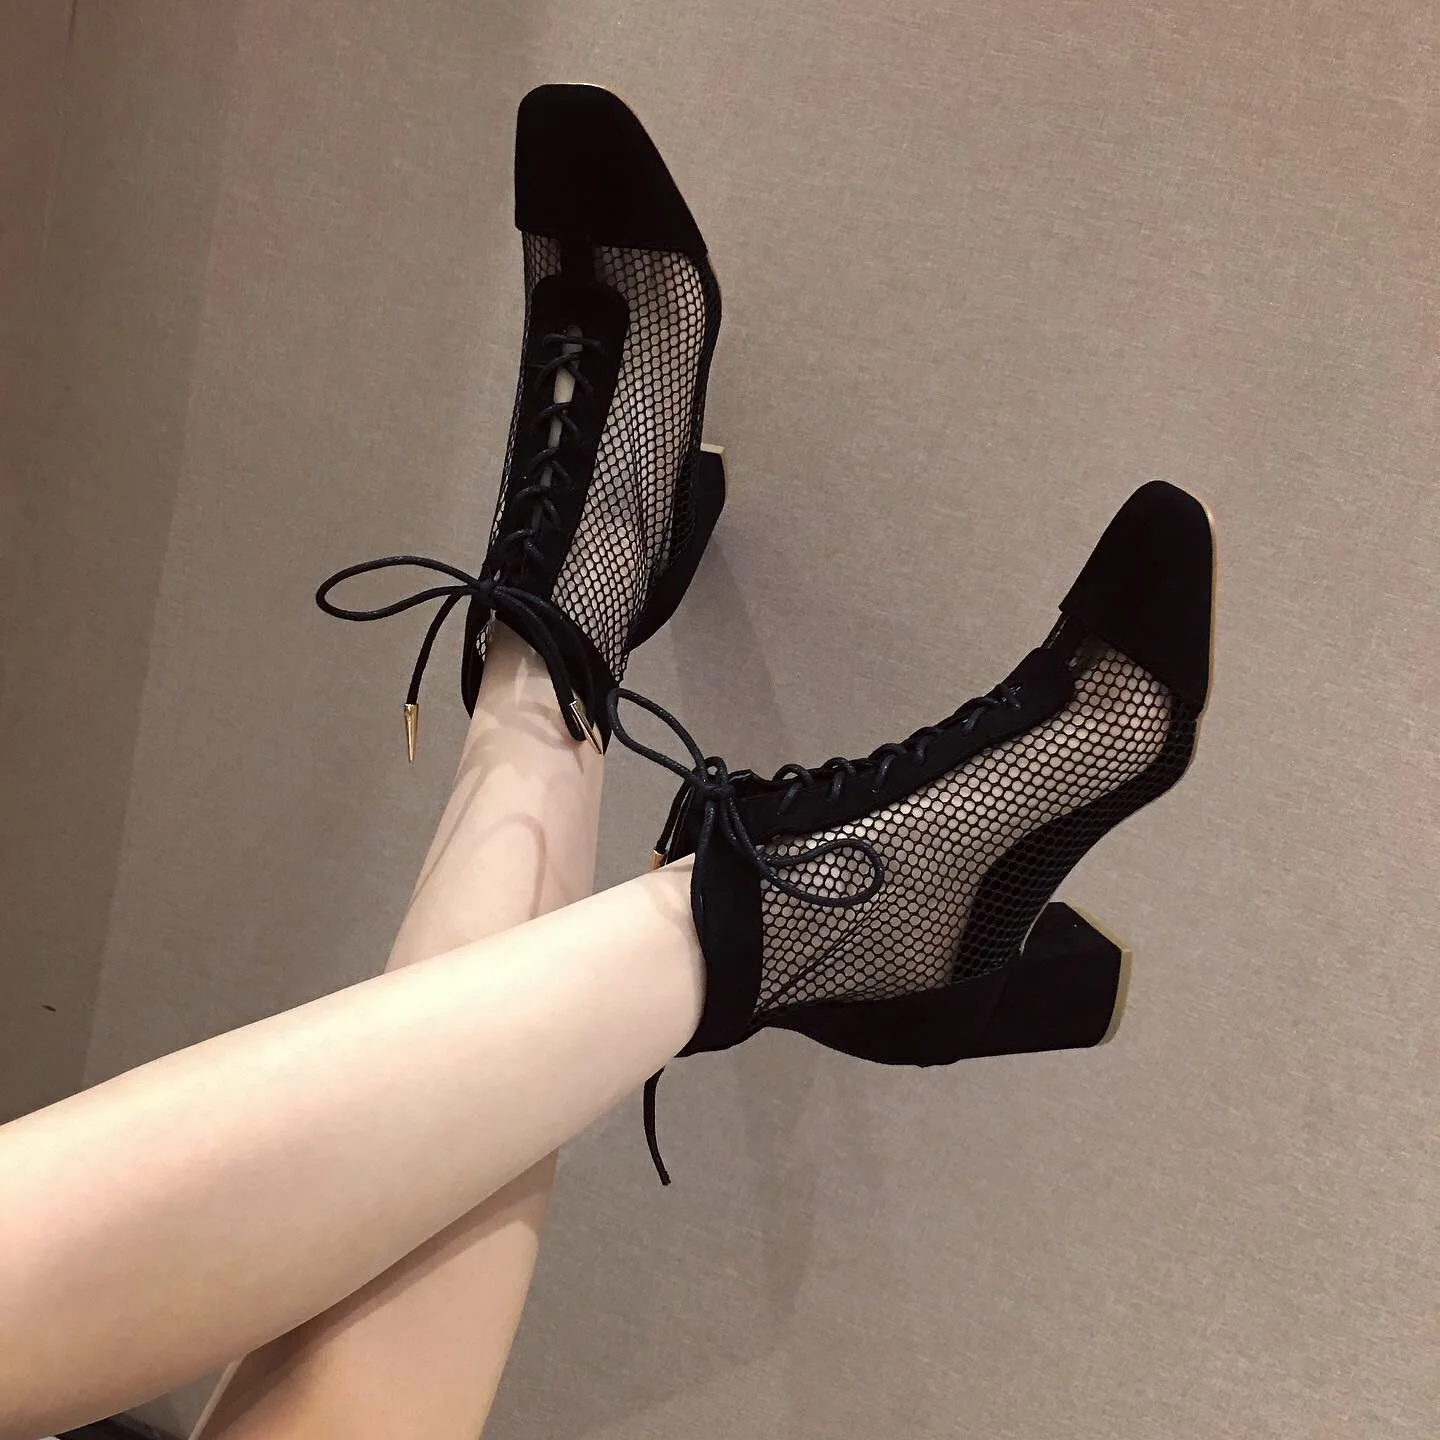 

Liren 2019 Summer Fashion Sexy Lady Air Mesh Women Boots Round Wrapped Toe Square Heels Cross-tie Lace-up Zip Fashion Shoes